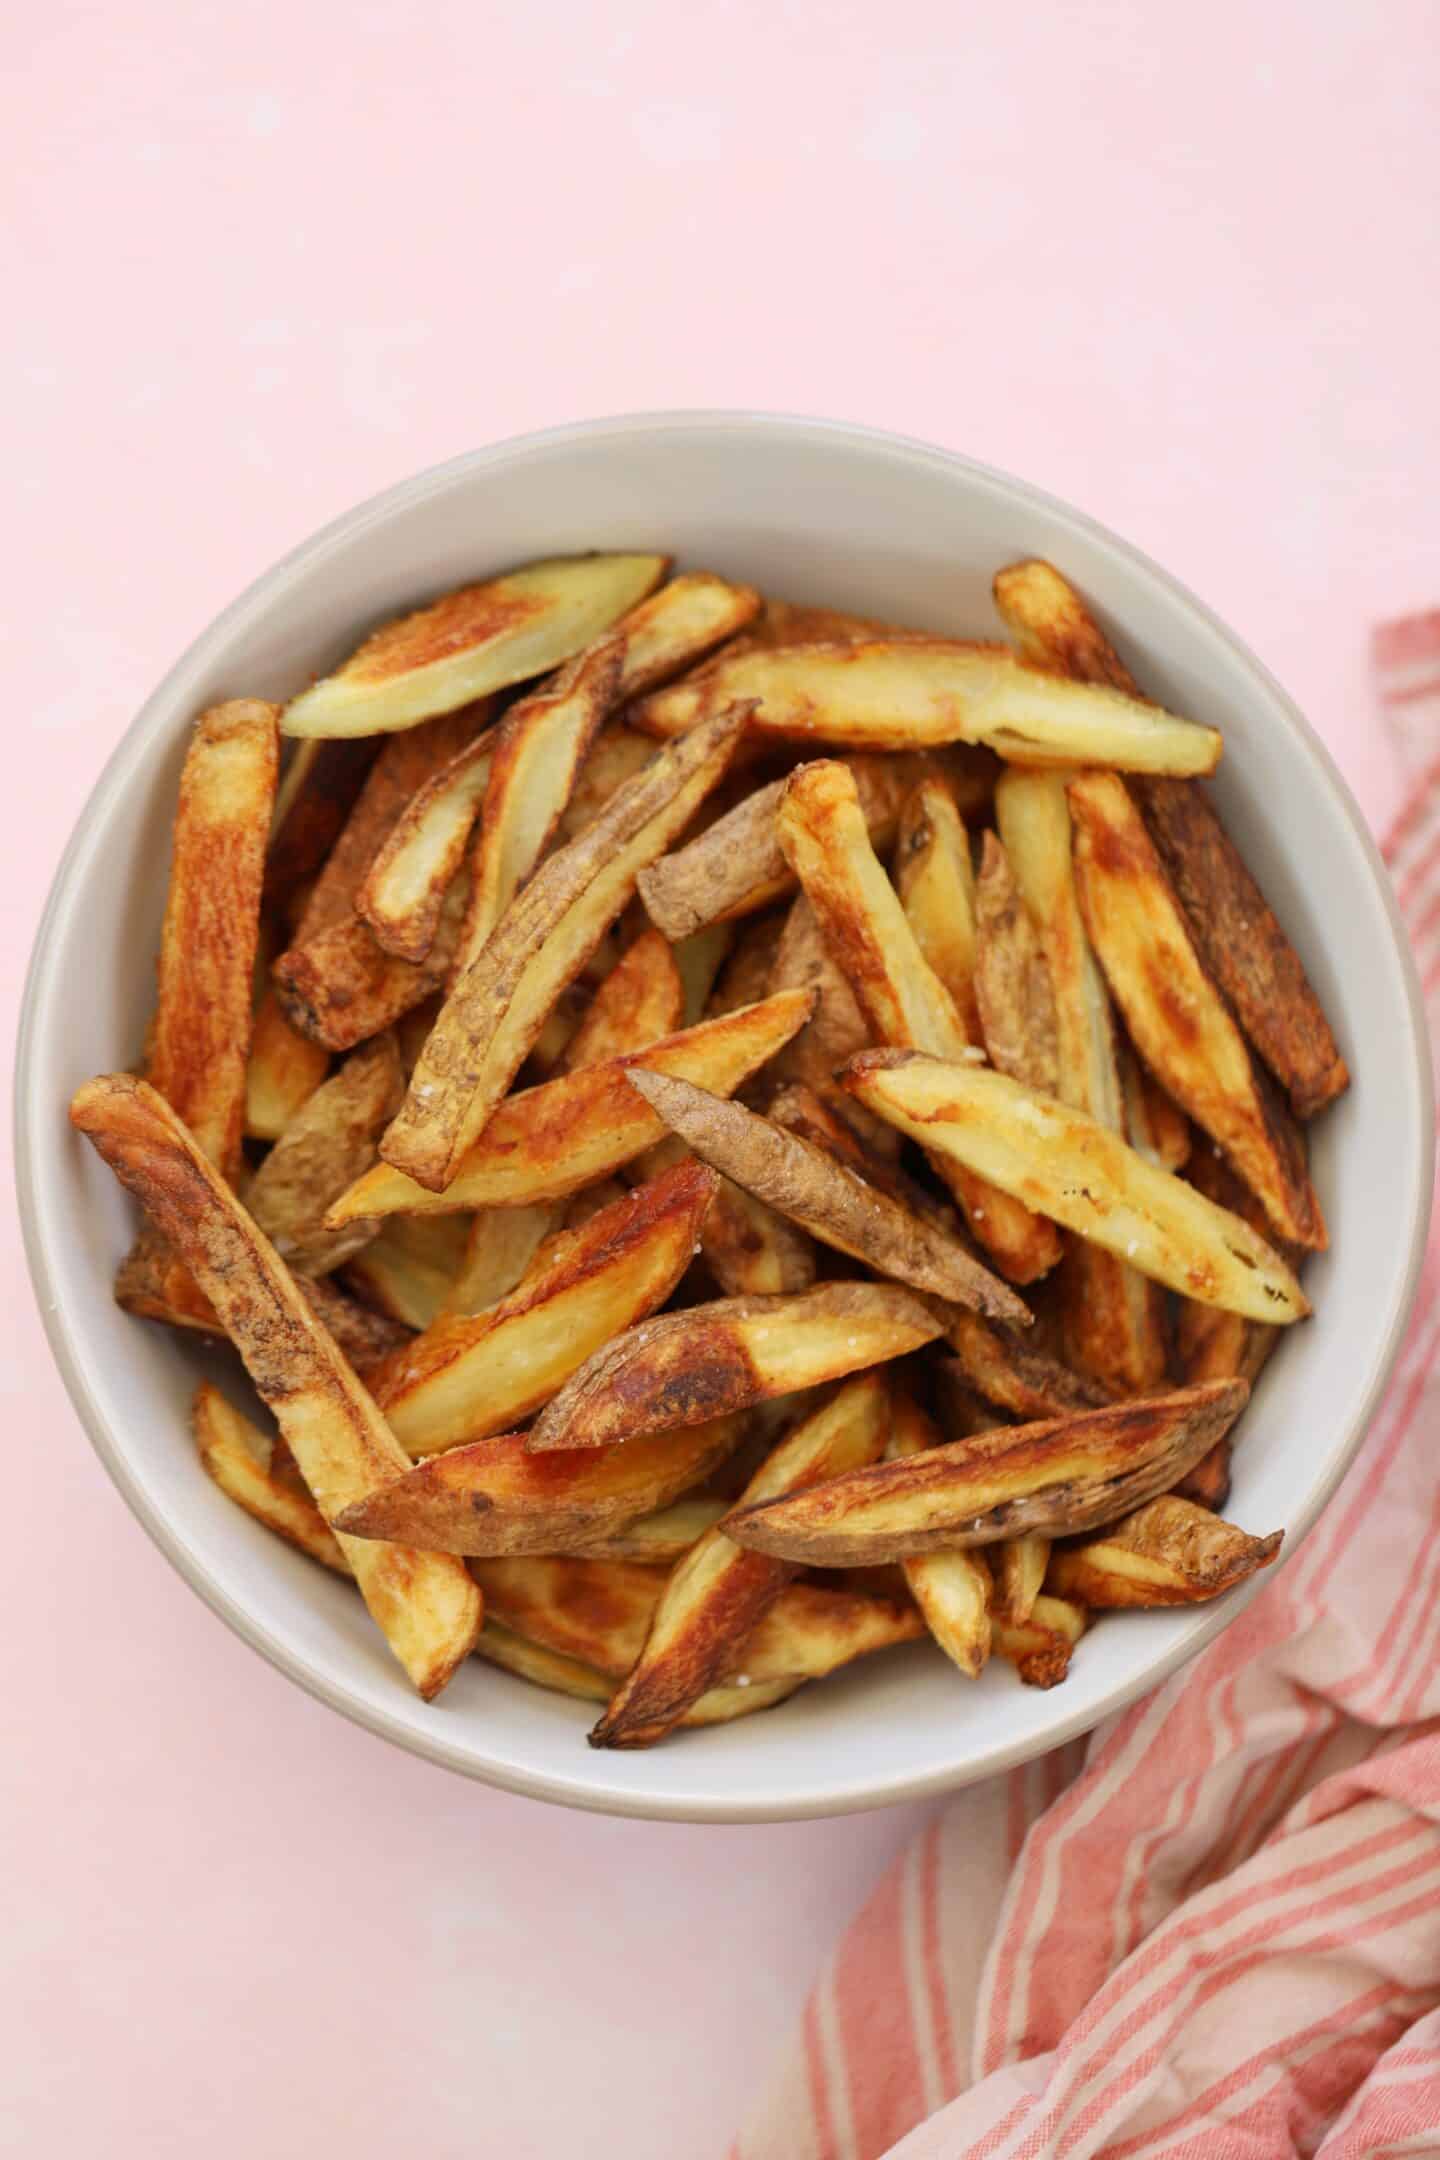 A bowl of skin on fries.